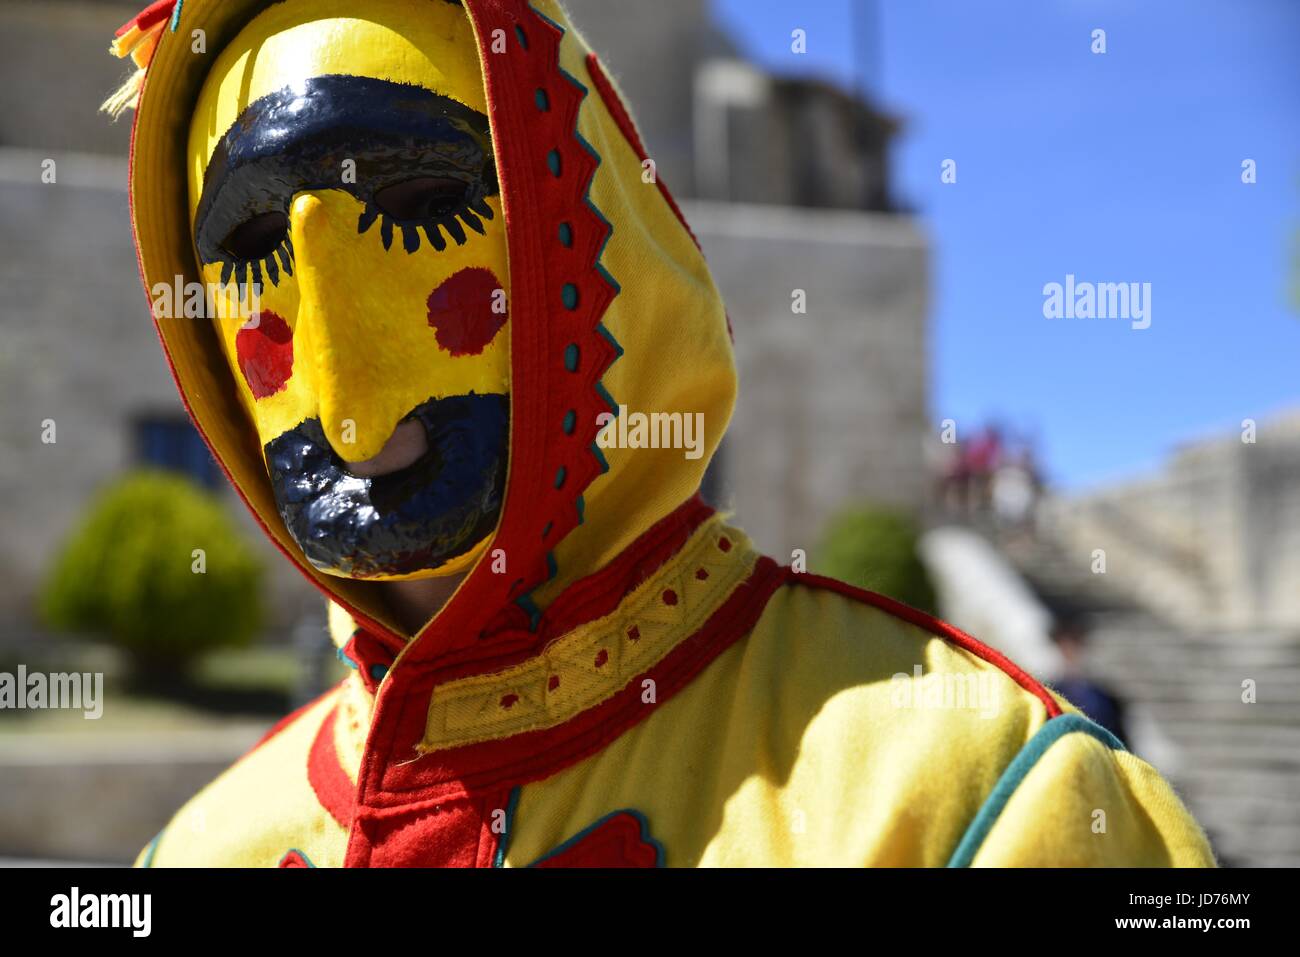 Castrillo de Murcia, Burgos, Spain. 18th June, 2017. The 'Colacho' is the character that gives his name to this event. He represents evil and therefore the devil and he is responsible for jumping over the babies. Dressed in red and yellow, he usually wears a ridiculous and repulsive mask that he removes when jumping over the babies. In his hands he holds large castanets.  Photo: M.Ramirez/Alamy Live News Stock Photo